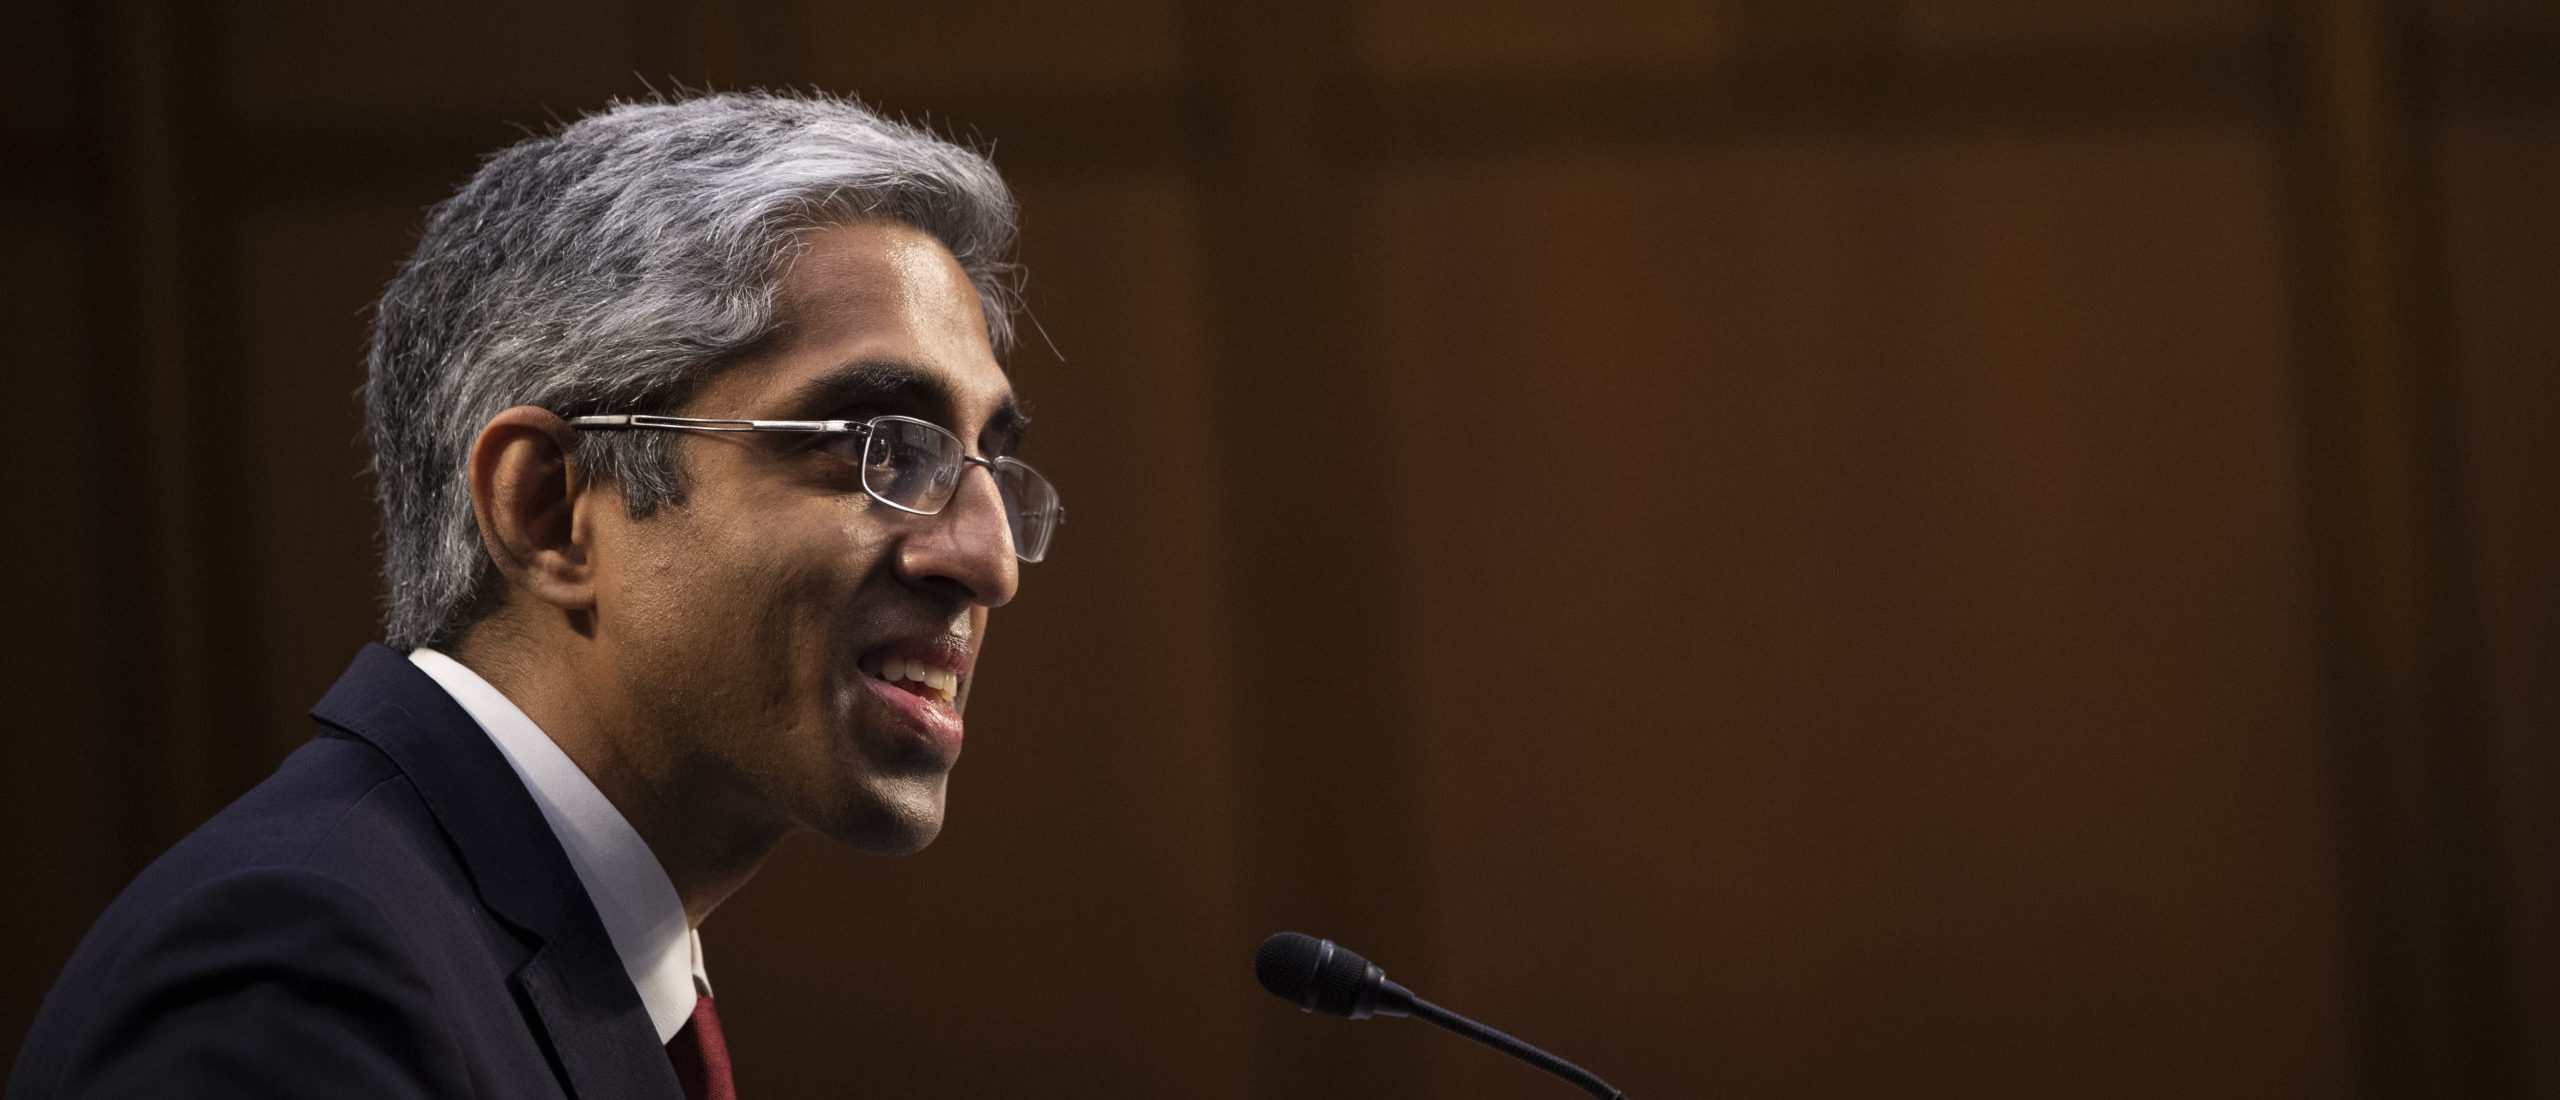 Vivek Murthy, nominee for U.S. Surgeon General, testifies at his confirmation hearing before the Senate Health, Education, Labor, and Pensions Committee February 25, 2021 on Capitol Hill. (Photo by Caroline Brehman-Pool/Getty Images)